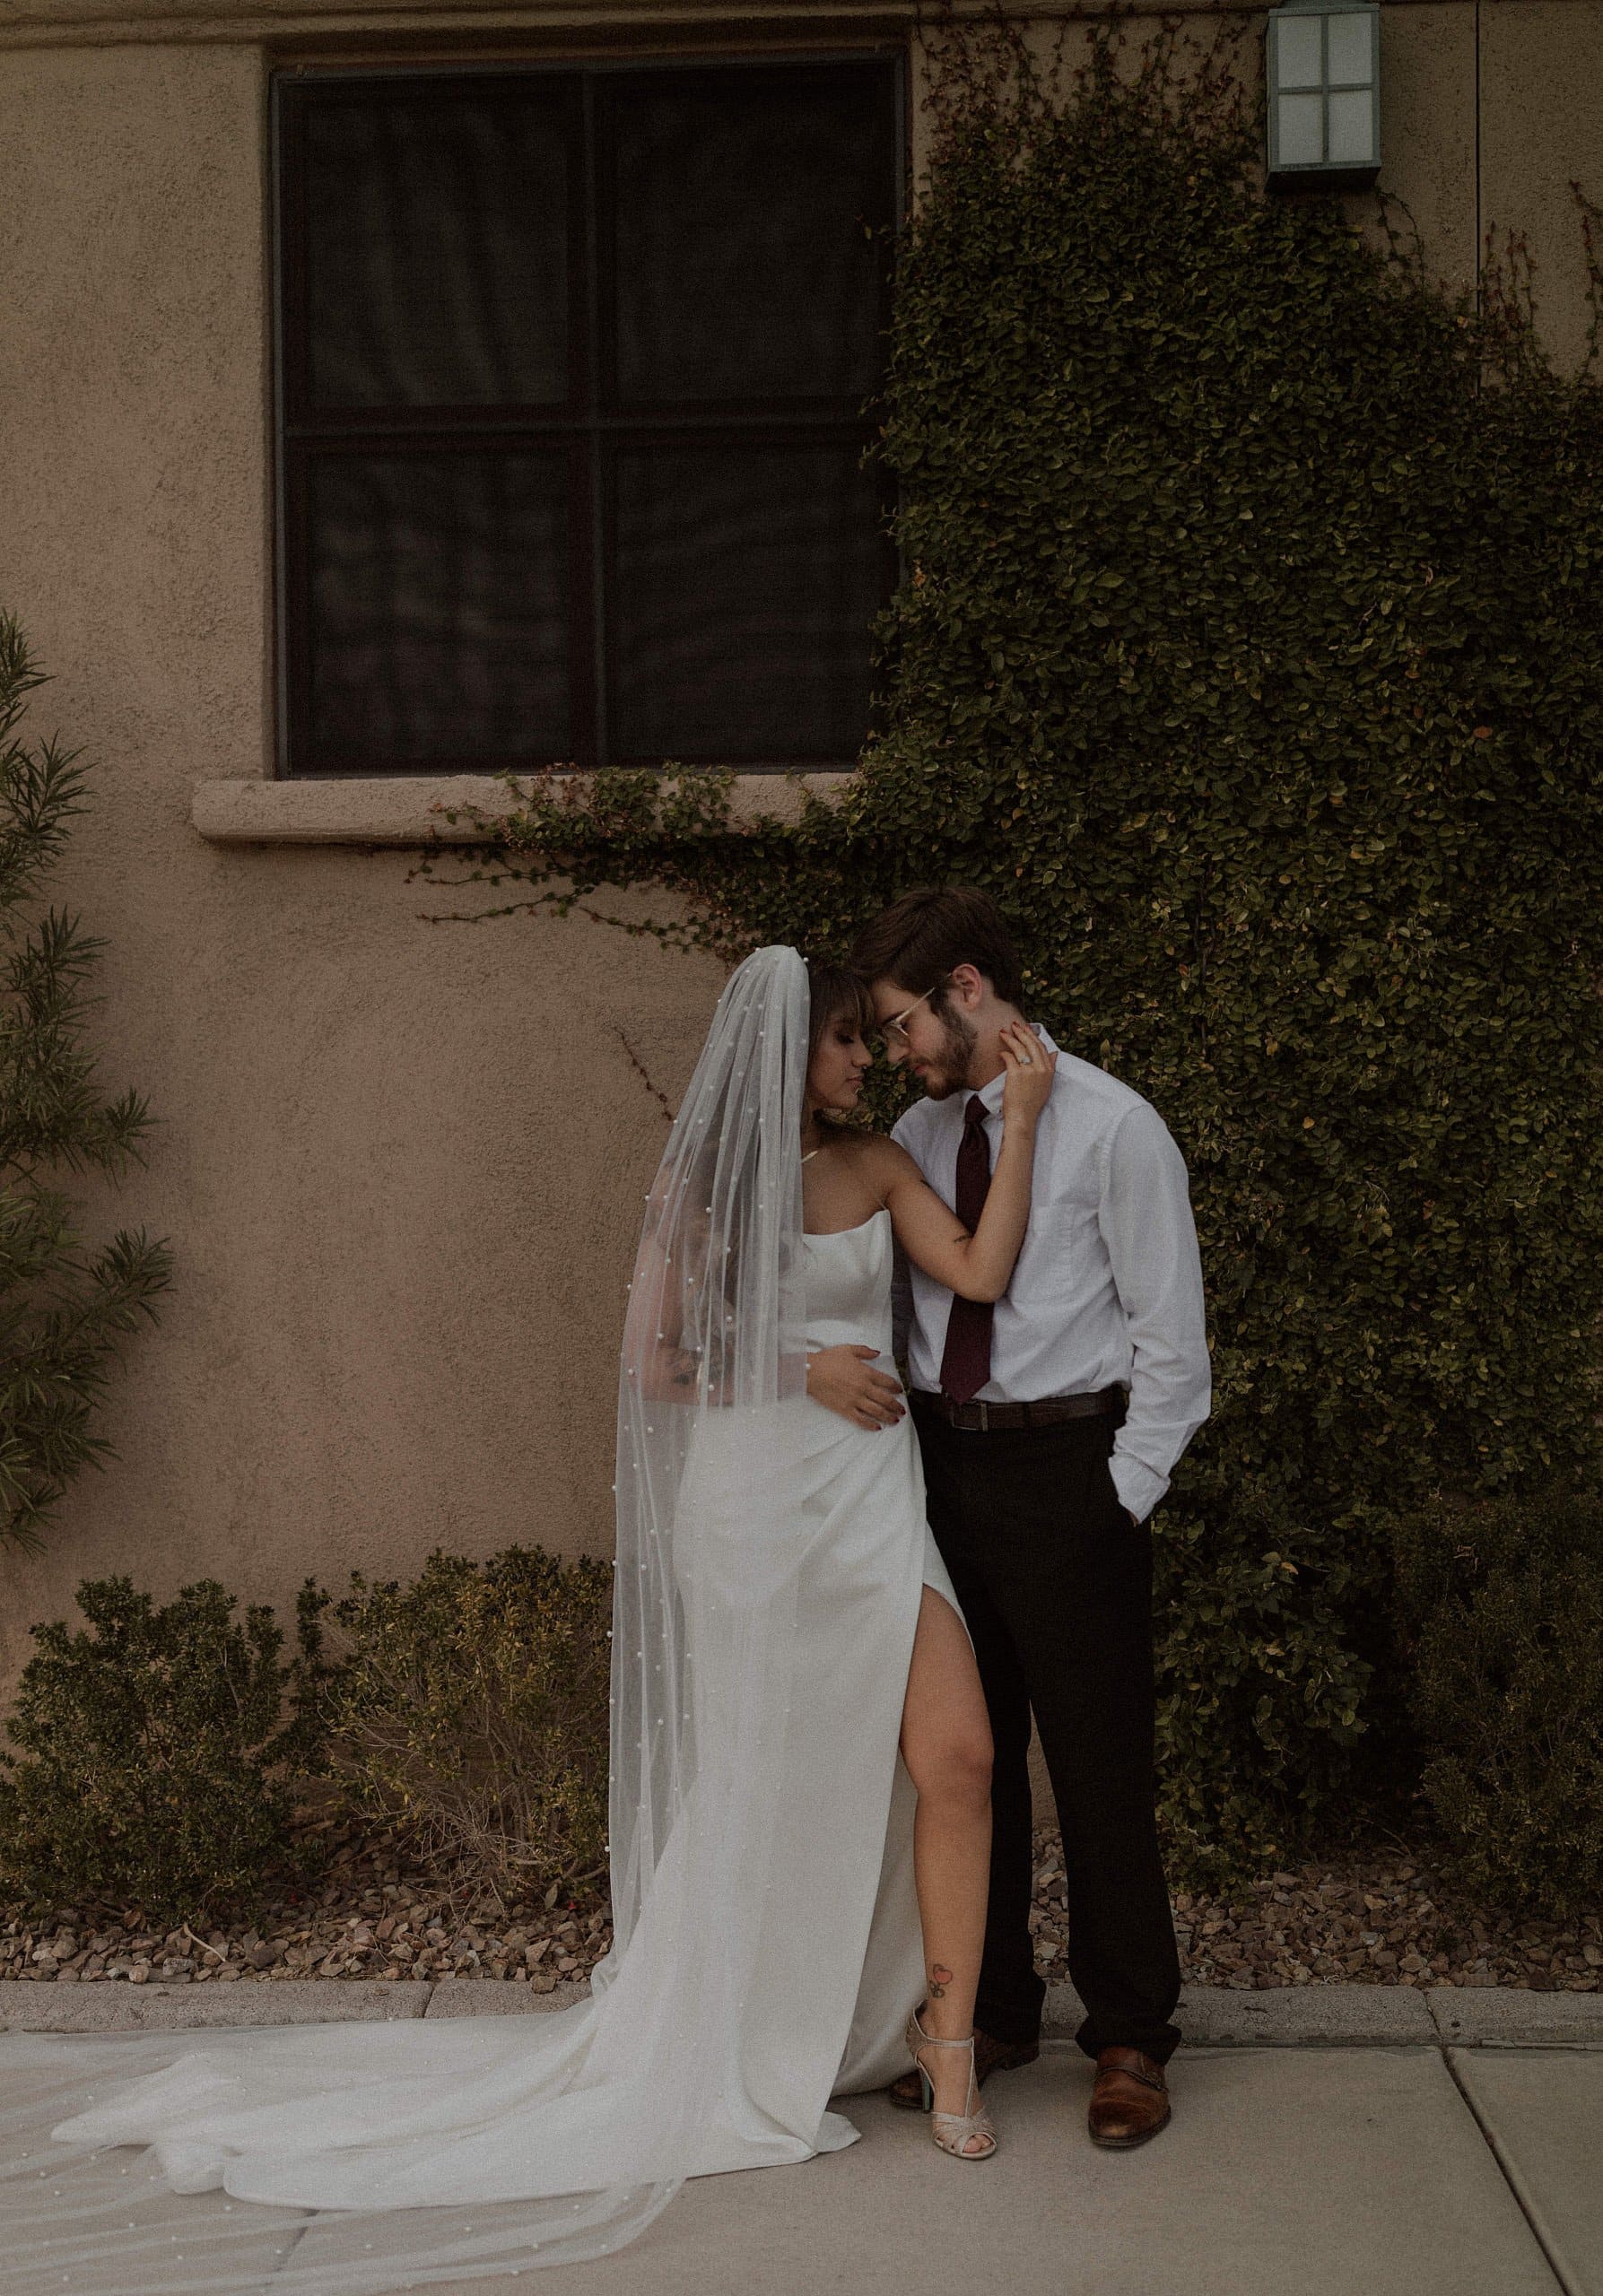 Bridal portraits for downtown Las Vegas elopement with cathedral veil